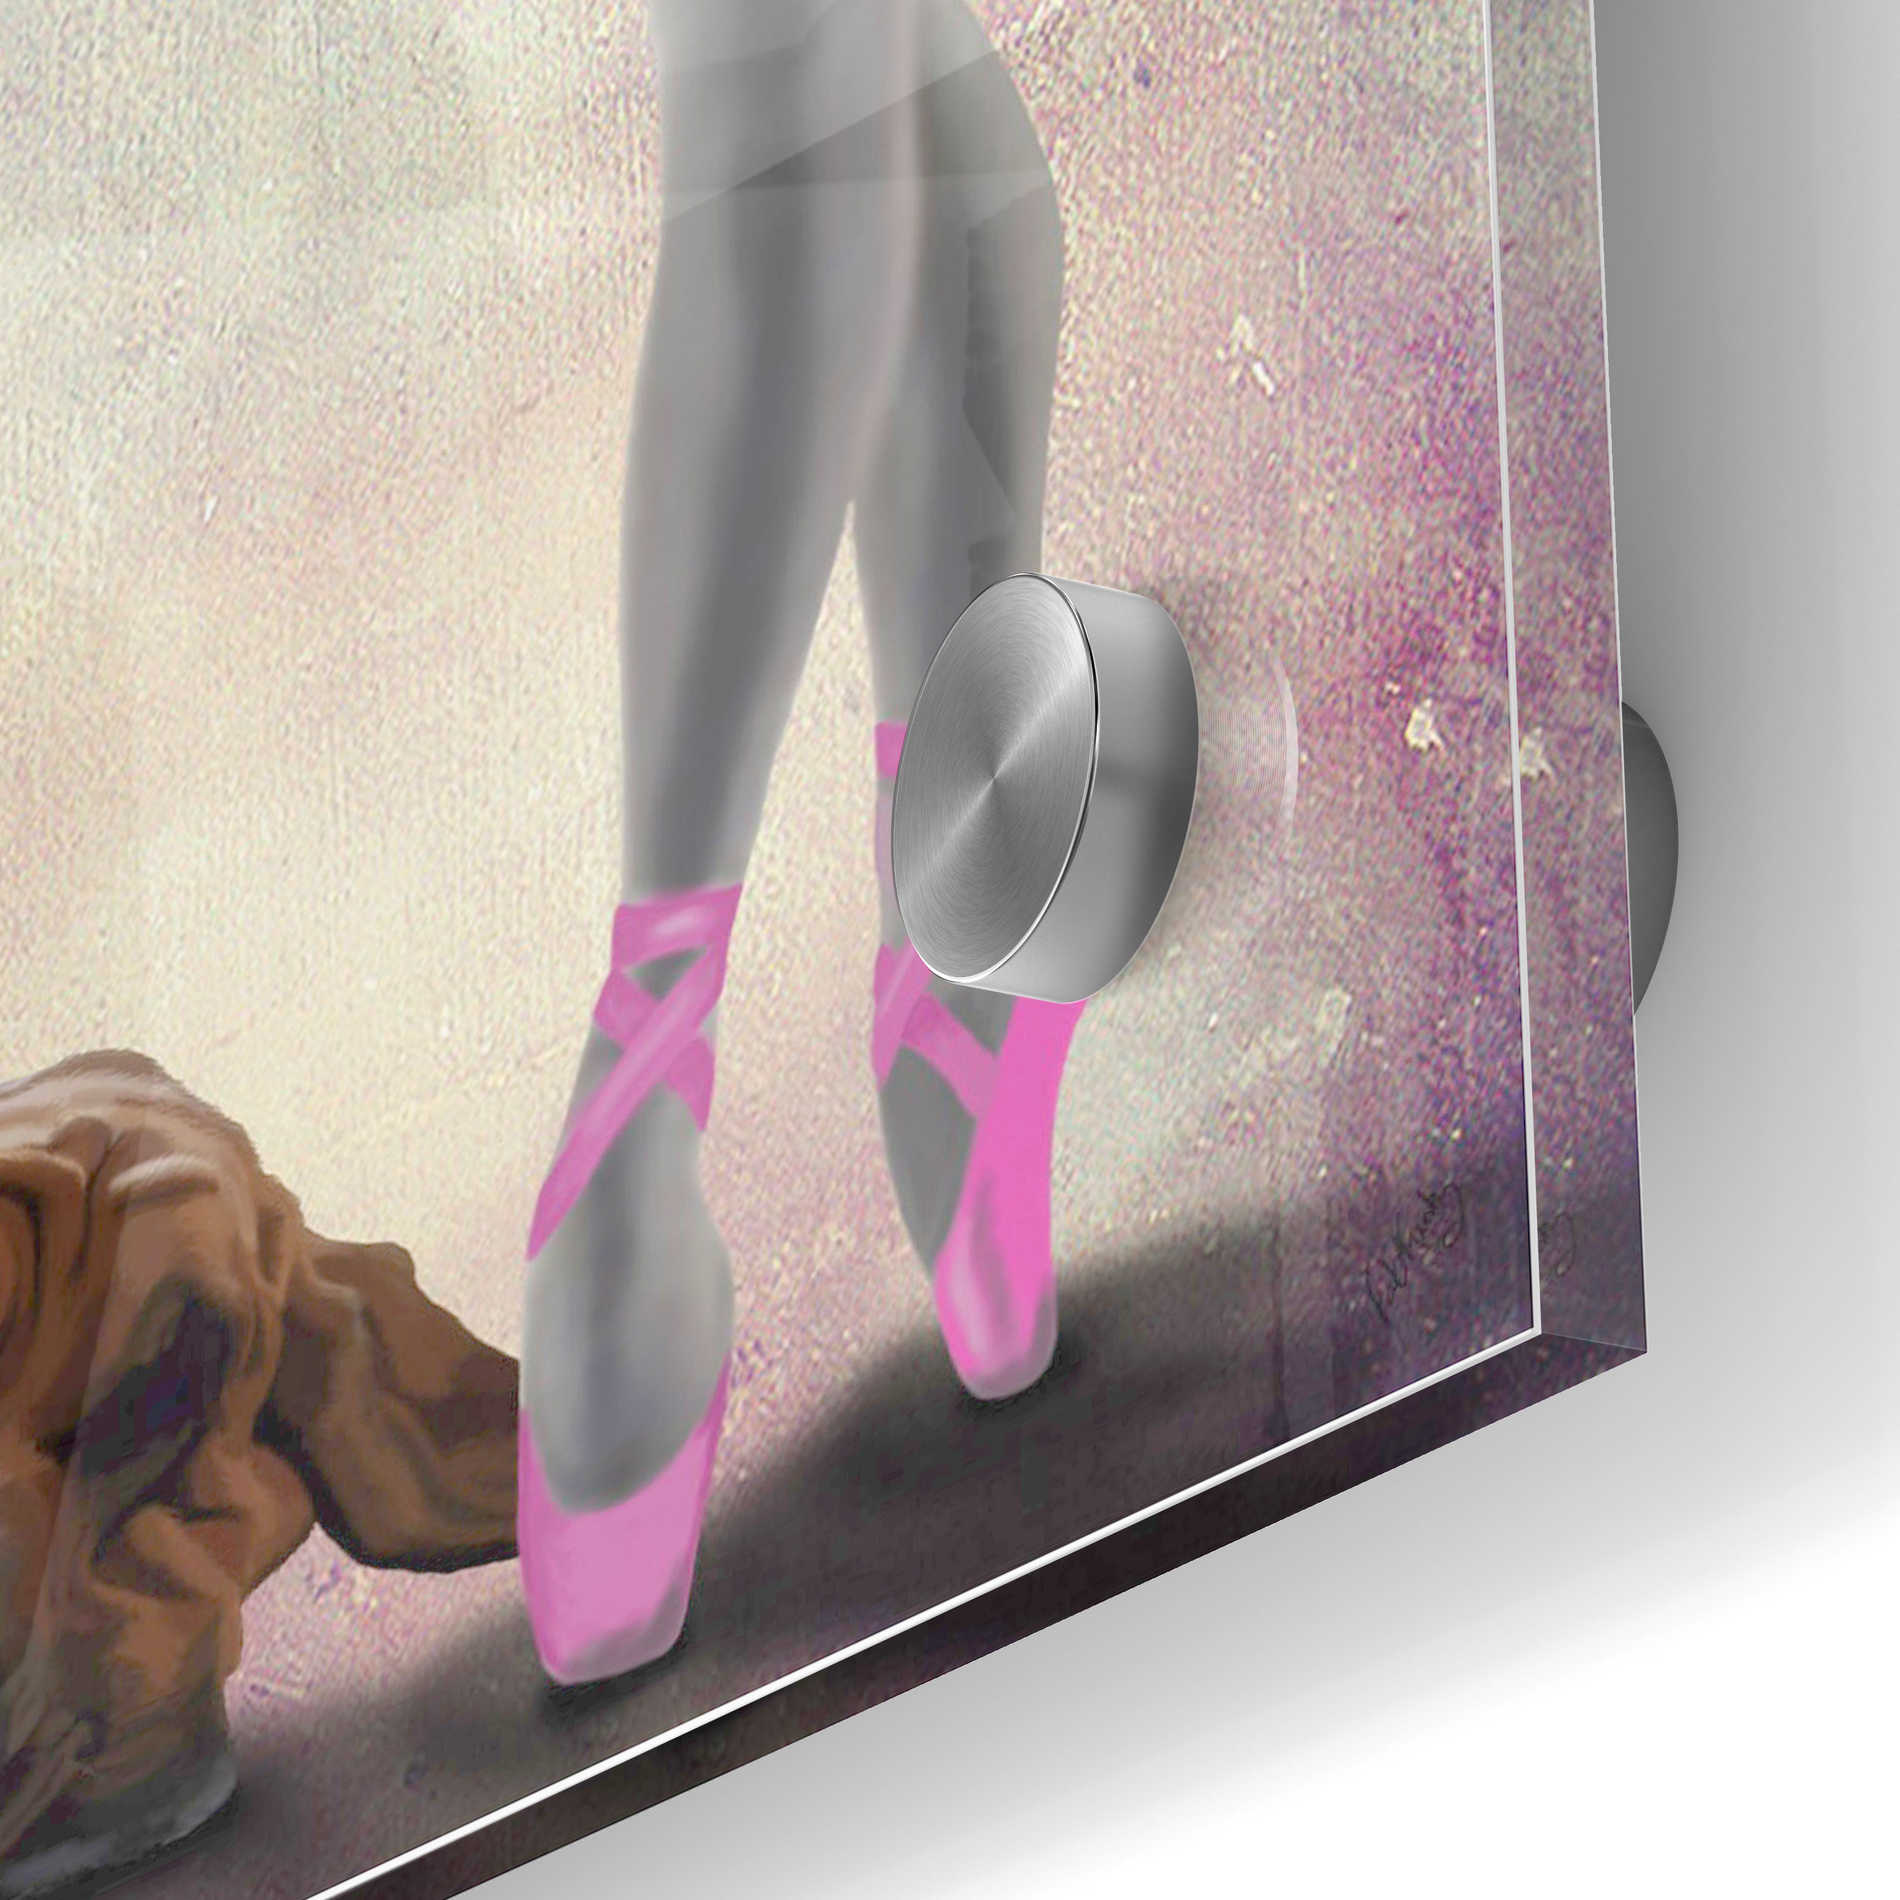 Epic Art 'Bloodhound And Ballet Dancer' by Fab Funky Acrylic Glass Wall Art,24x36